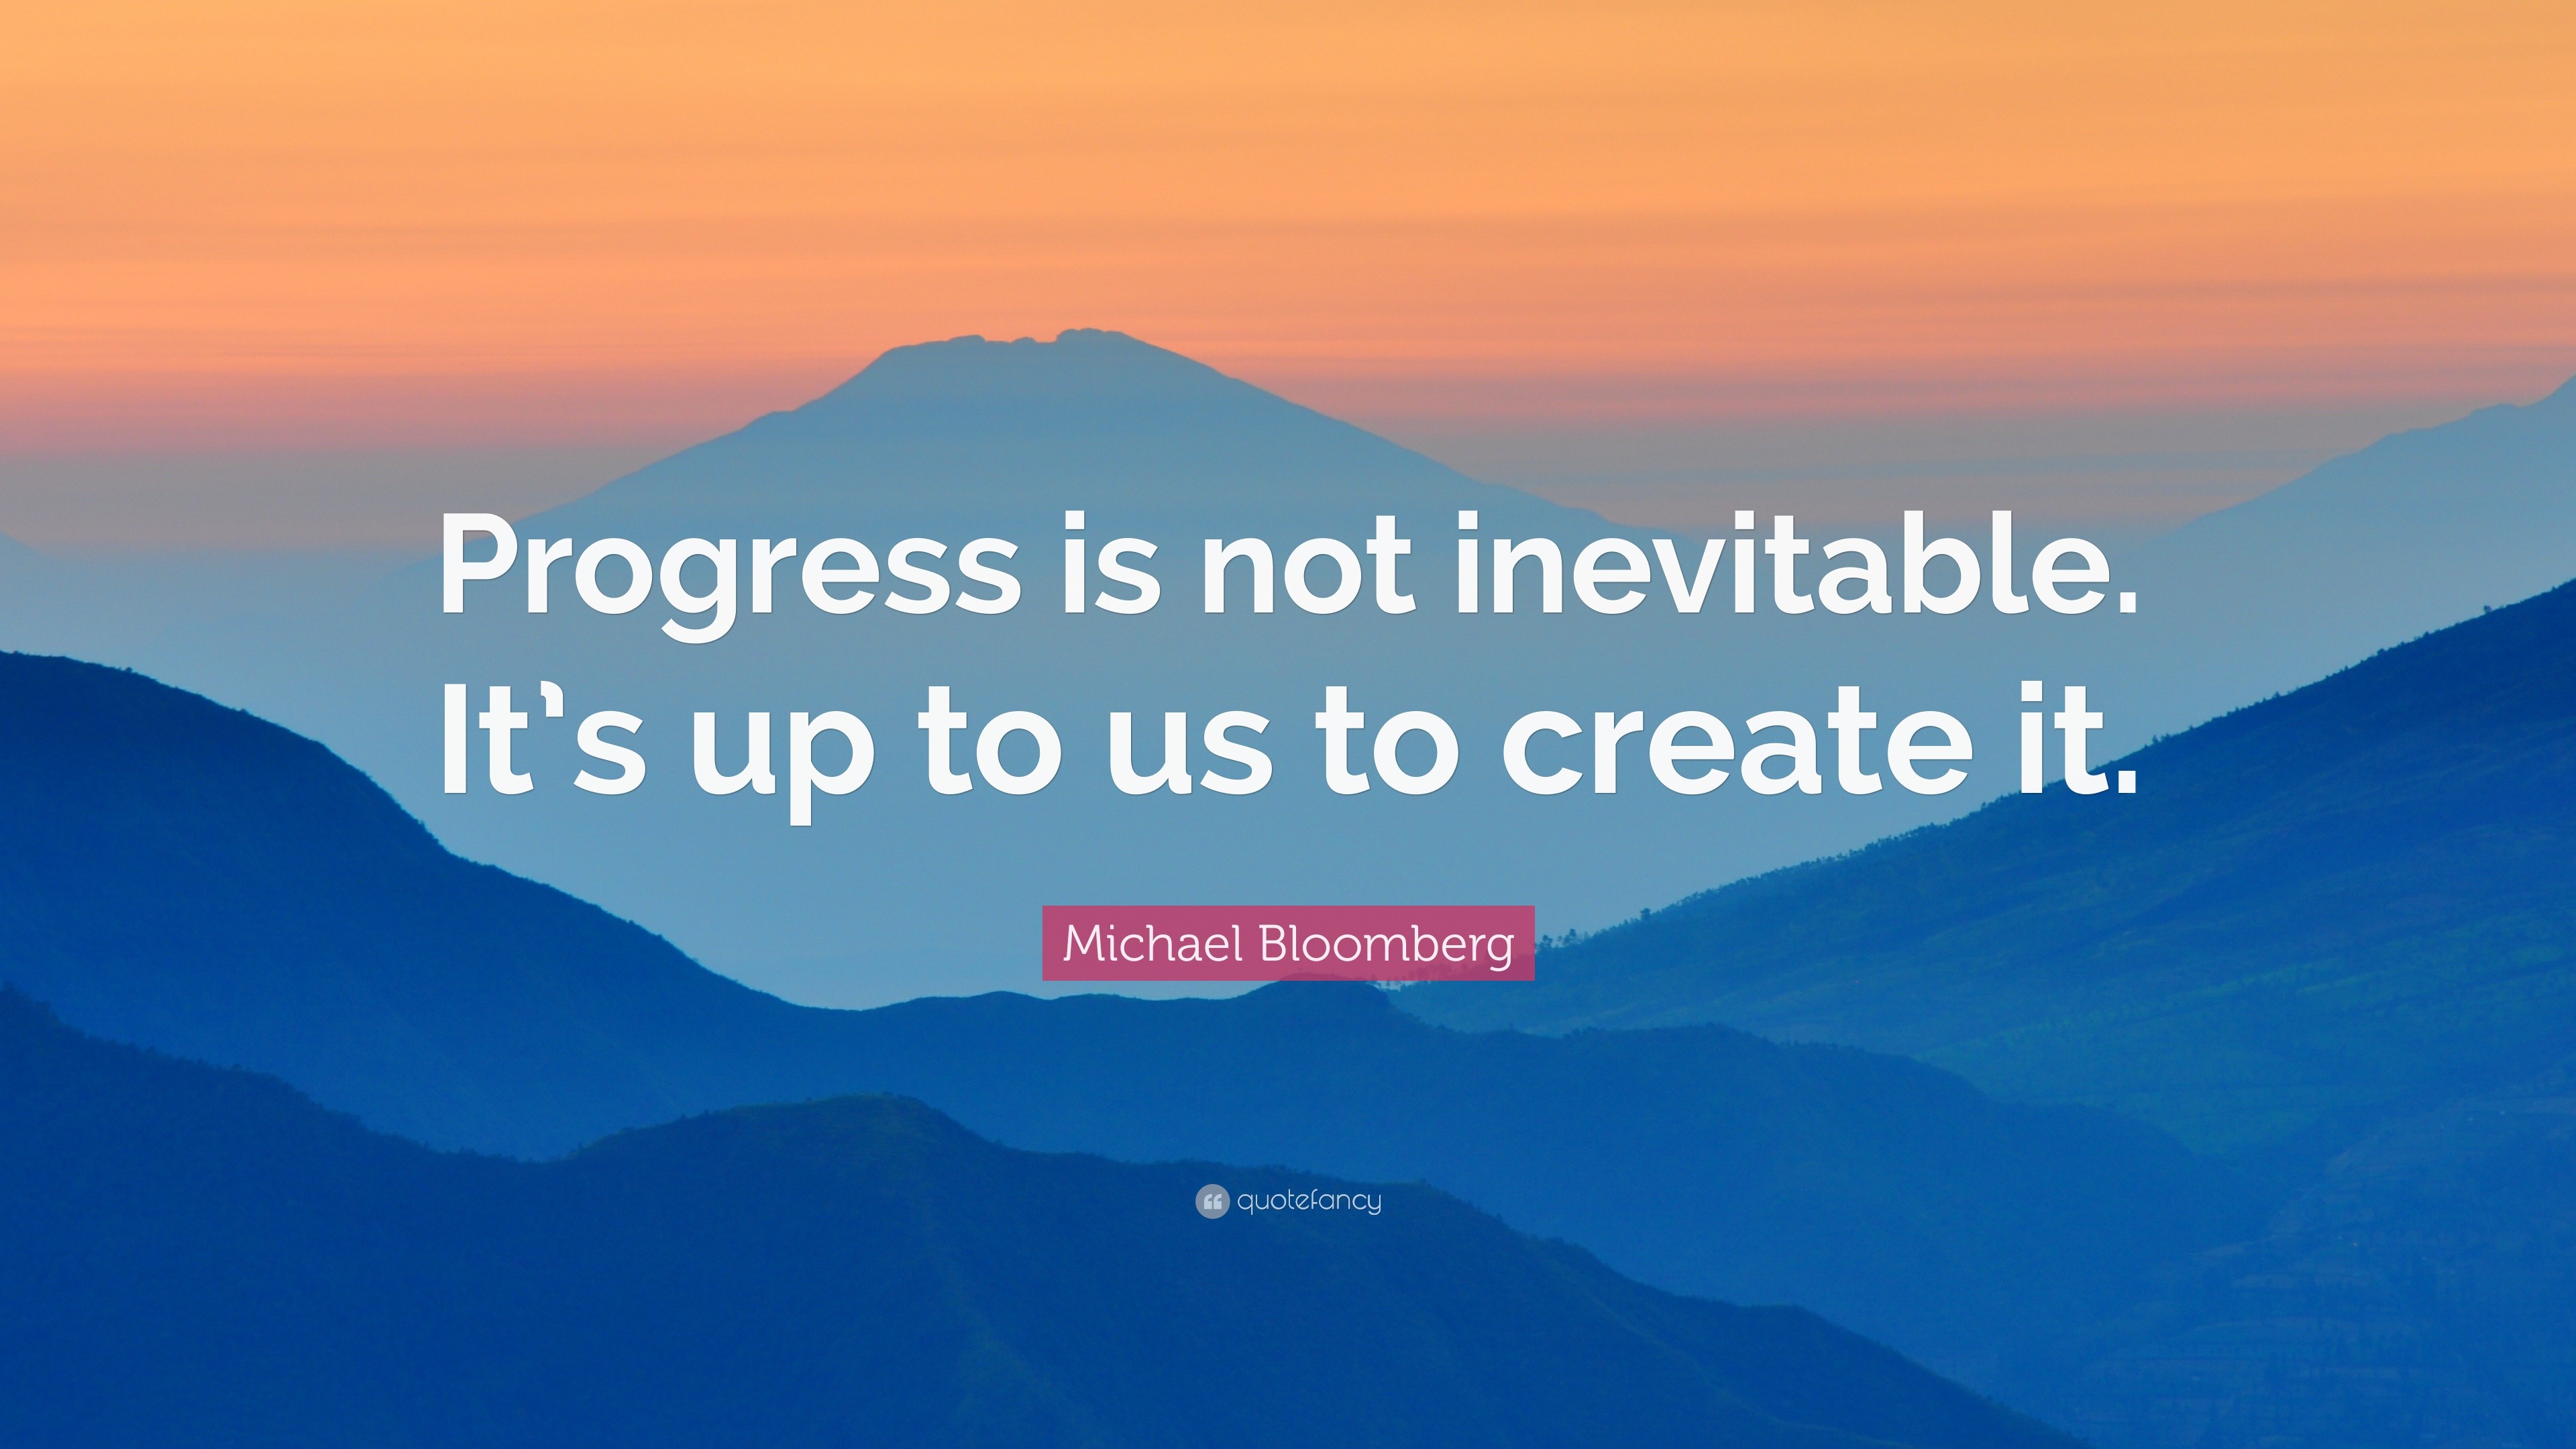 Michael Bloomberg Quote: “Progress is not inevitable. It’s up to us to ...